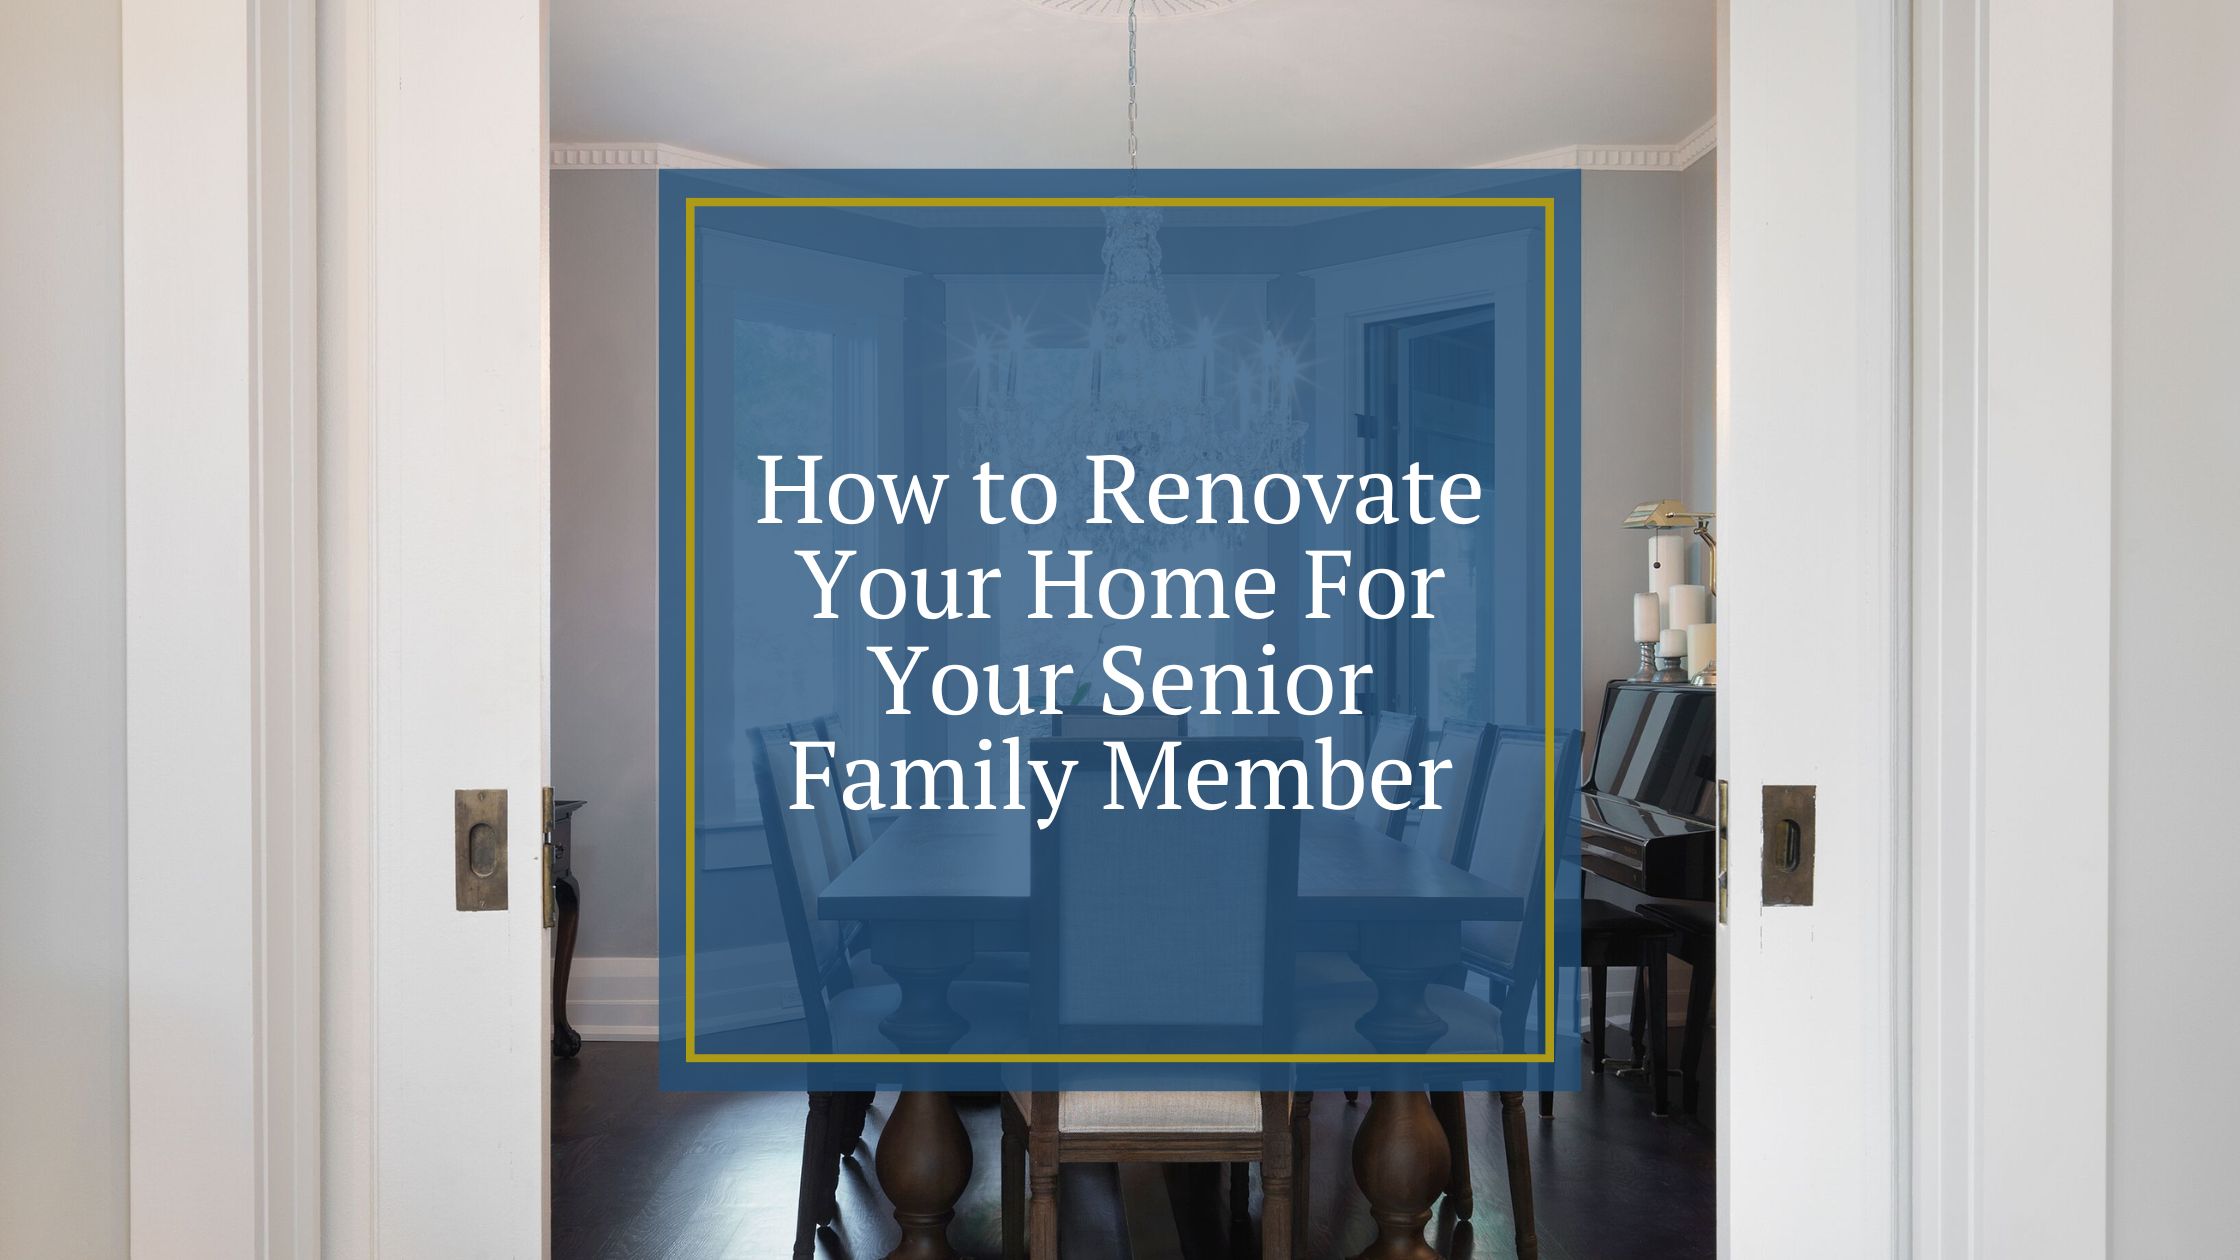 How to Renovate Your Home For Your Senior Family Member